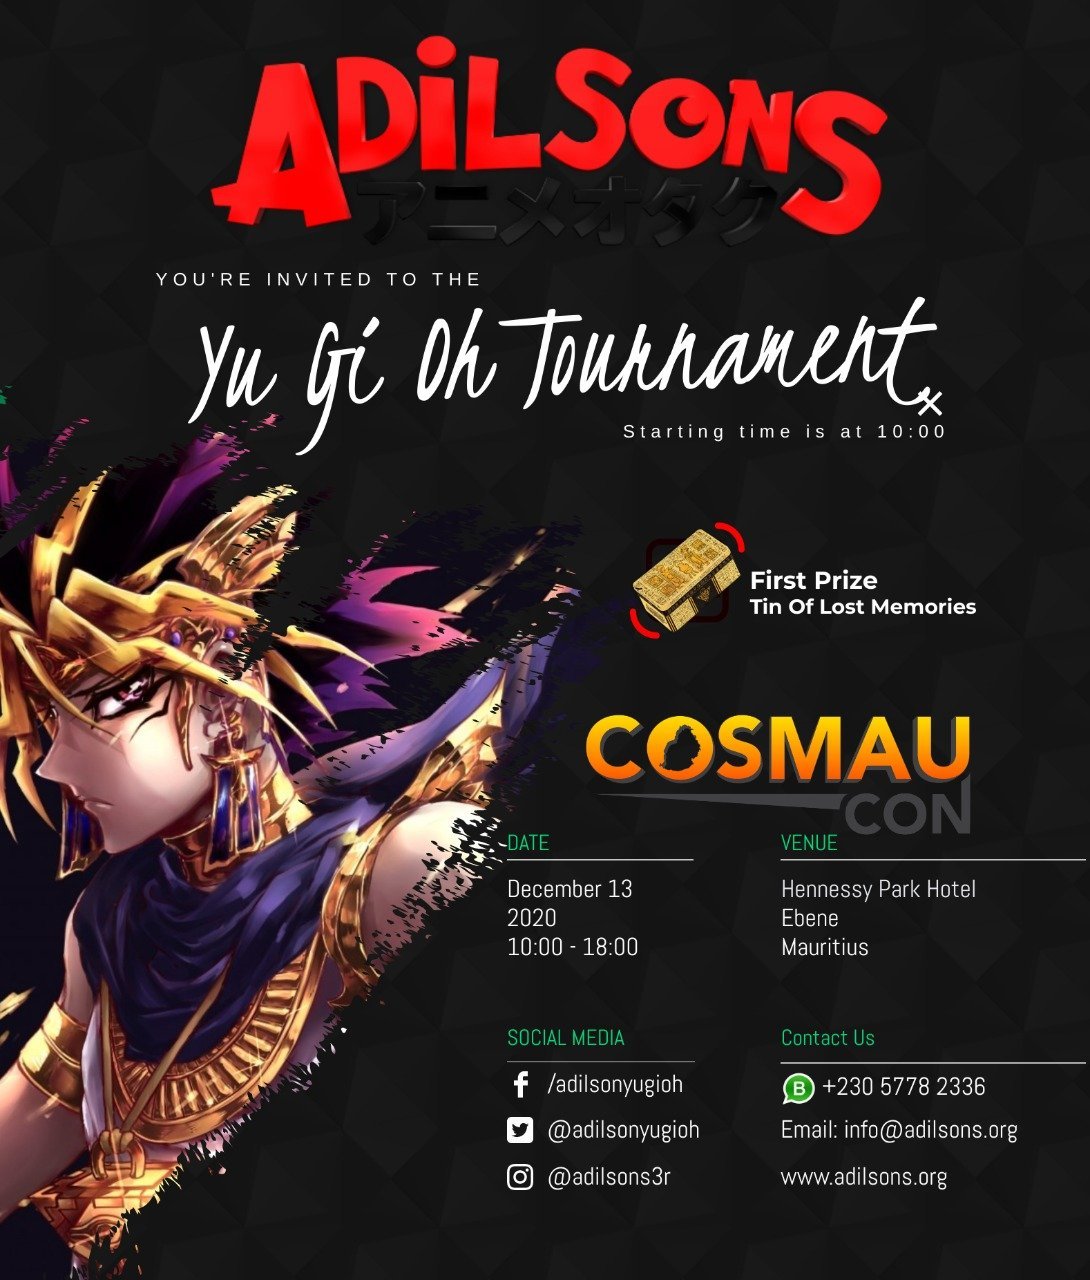 WIN 1 Ticket for 1 People for Cosmaucon 2020 | Adilsons